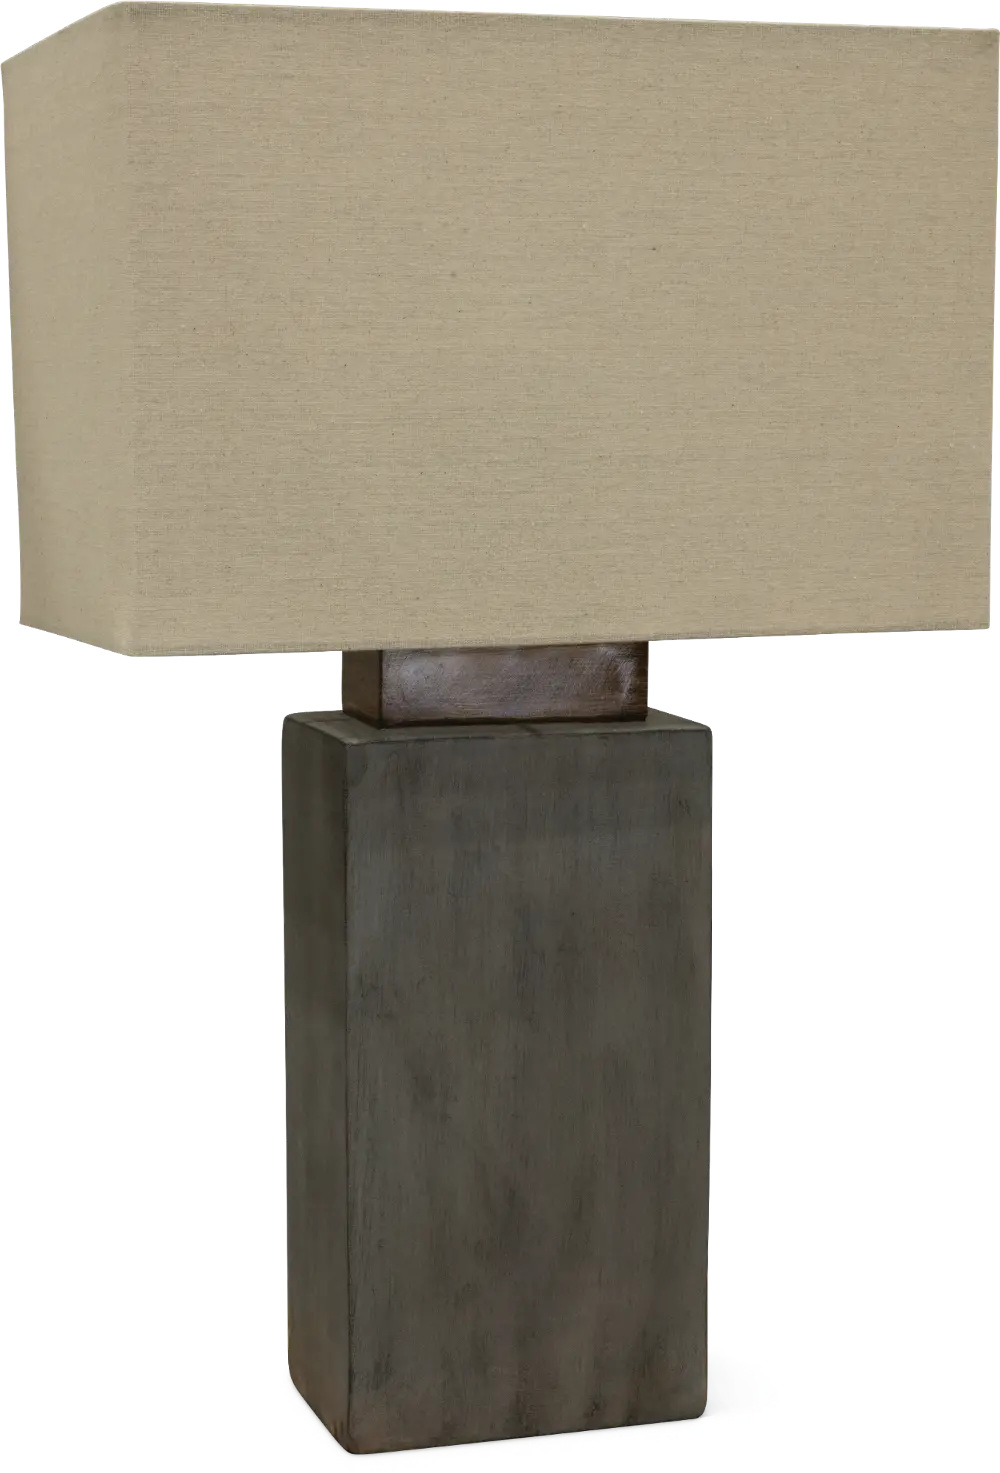 Cement Indoor-Outdoor Table Lamp with Rectangular Shade-1